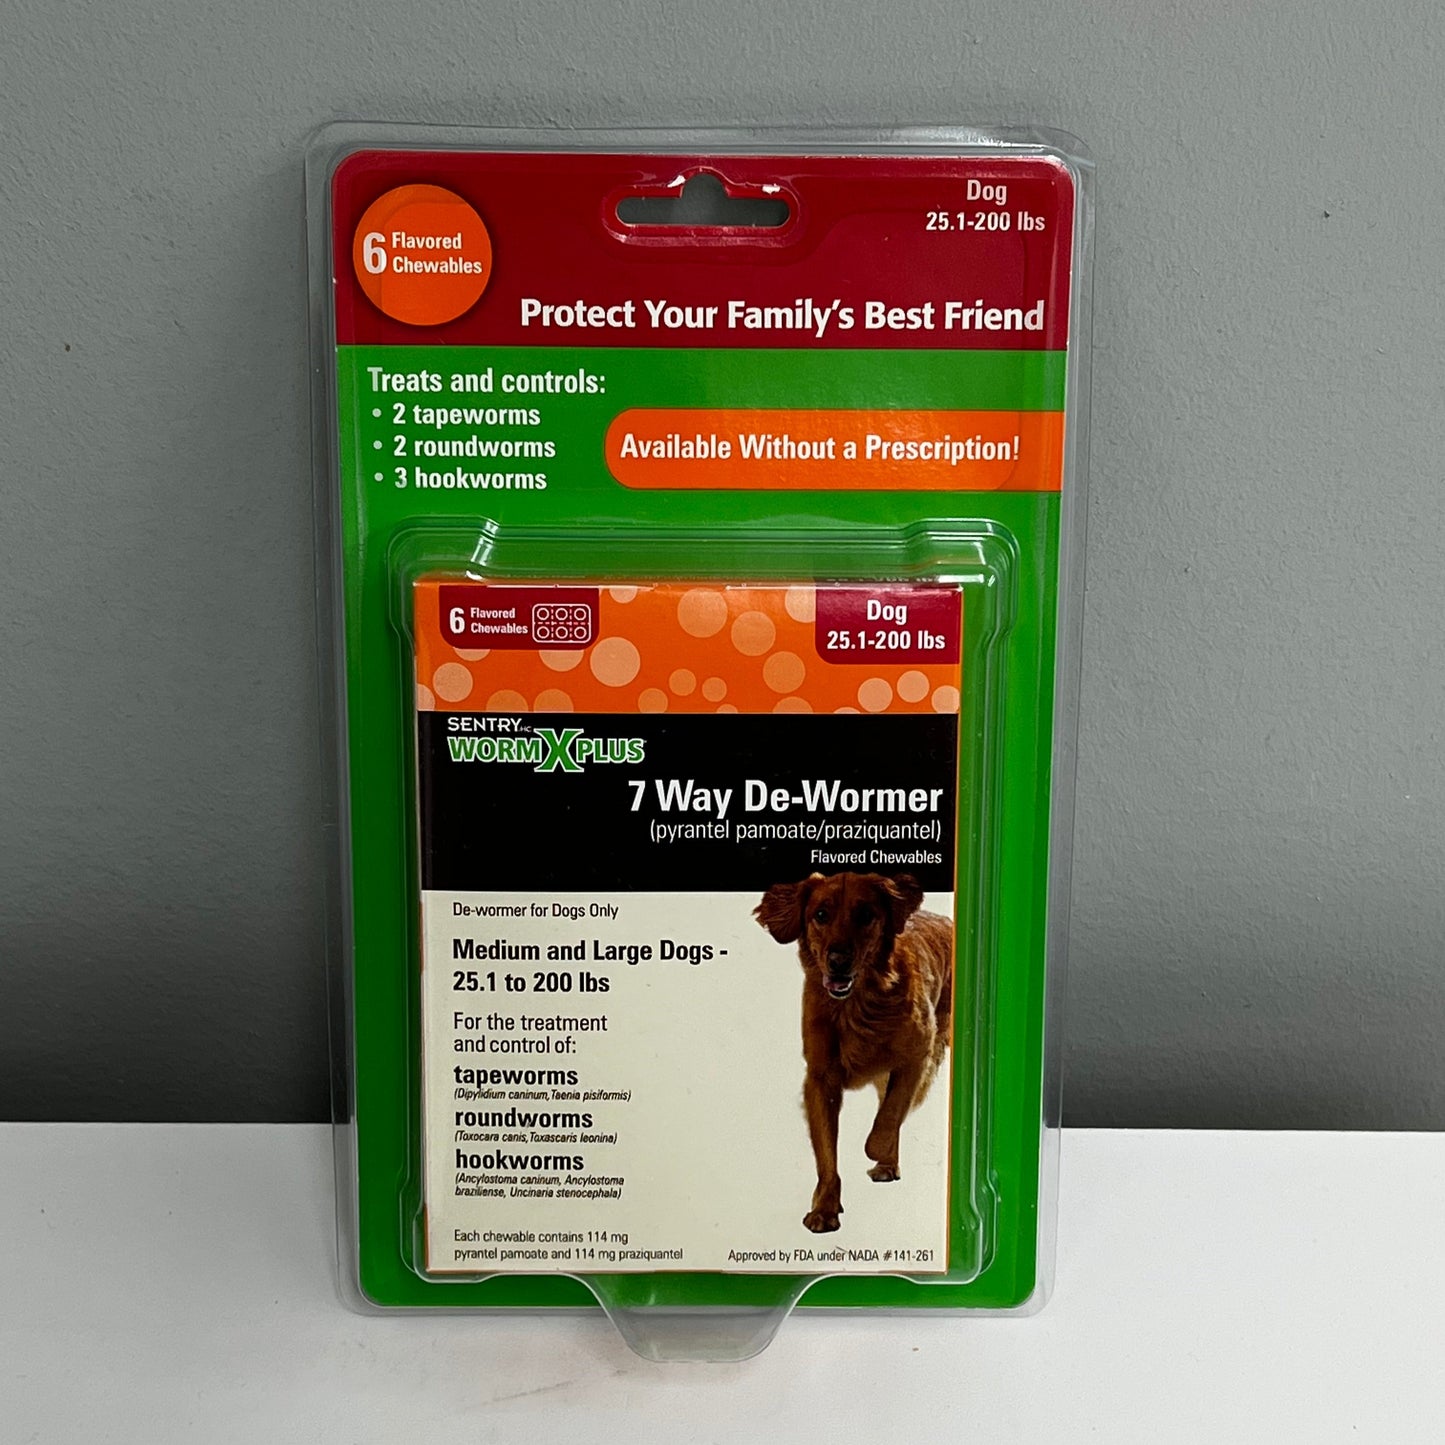 Sentry Worm X Plus for Medium/Large Dogs